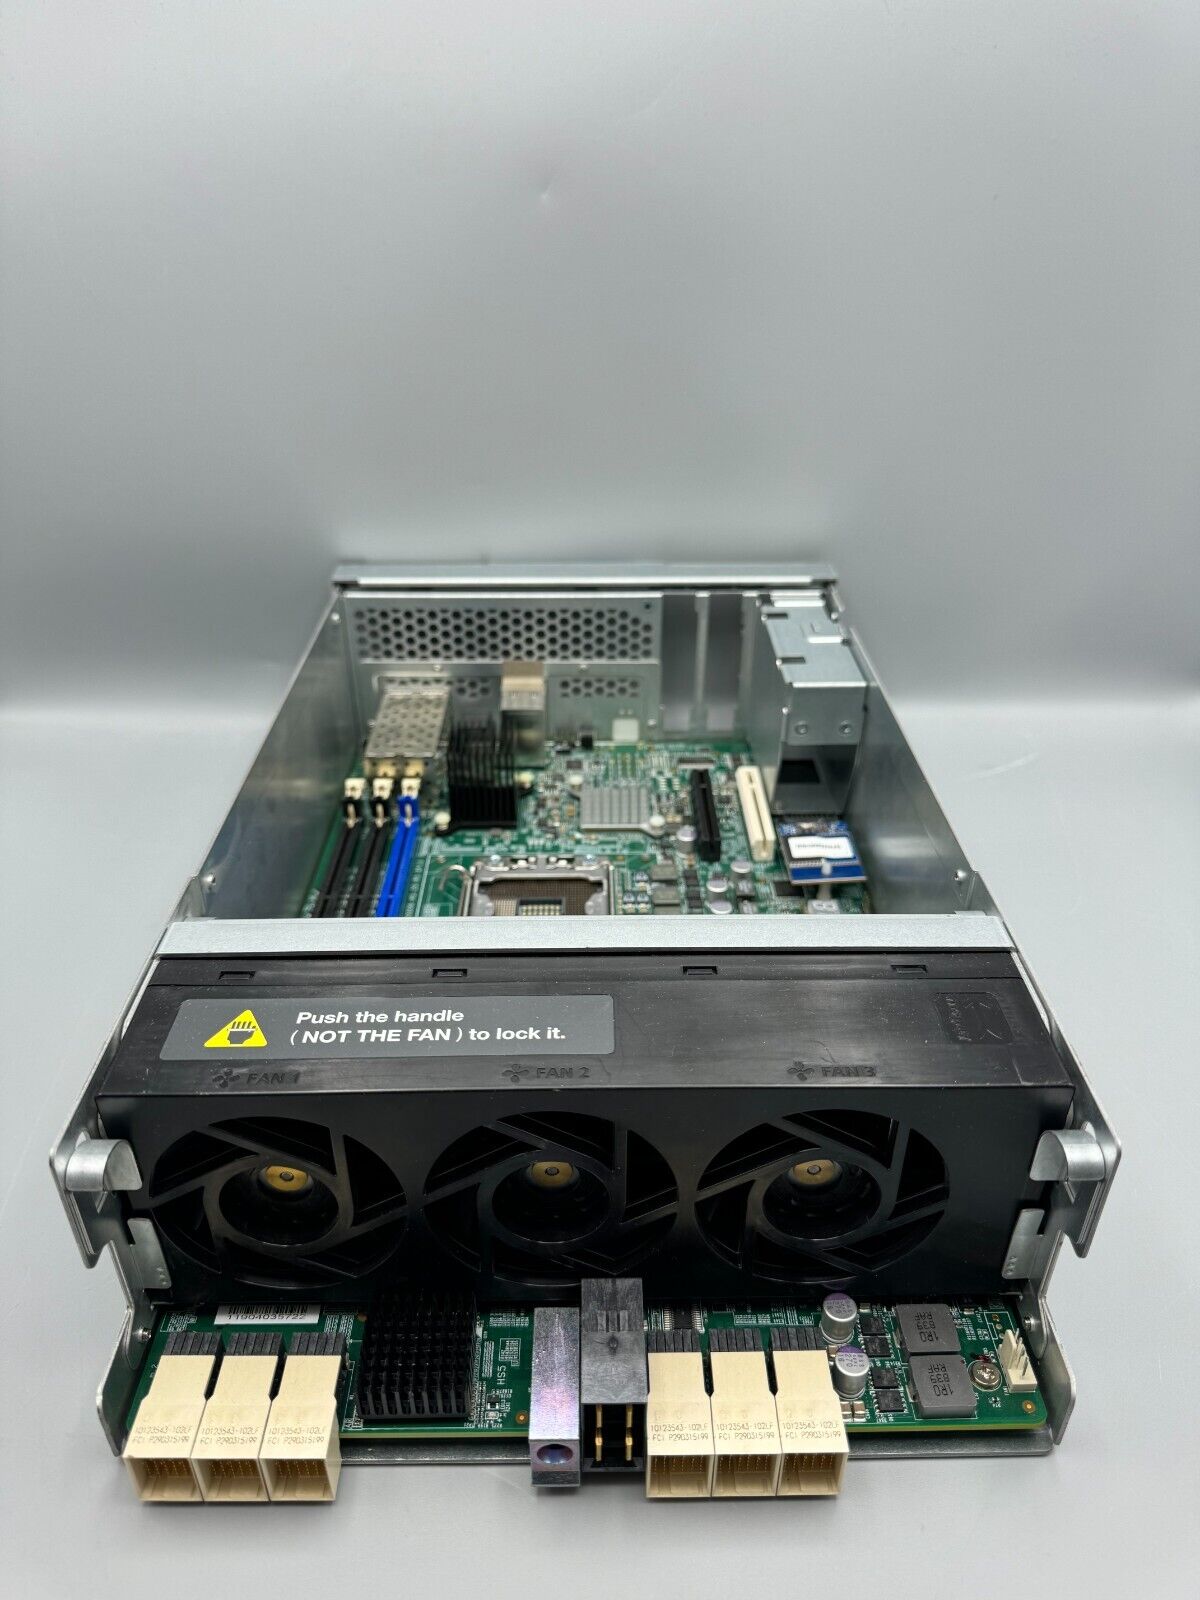 QNAP Field-Replaceable Controller Unit with Fan for the ES1640dc v2 NAS